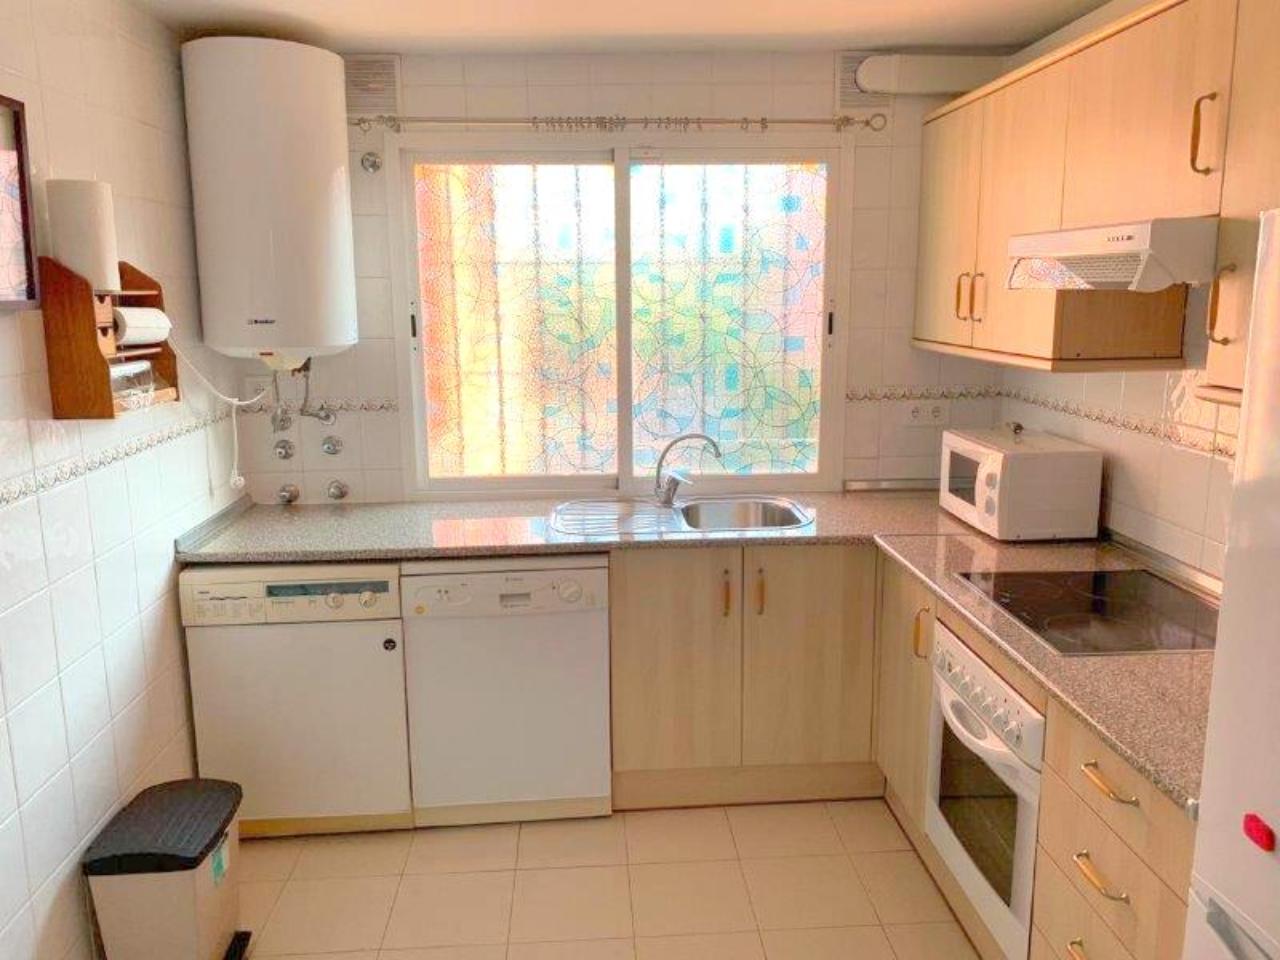 2 bedroom apartment for rent in Manilva near the beach - mibgroup.es